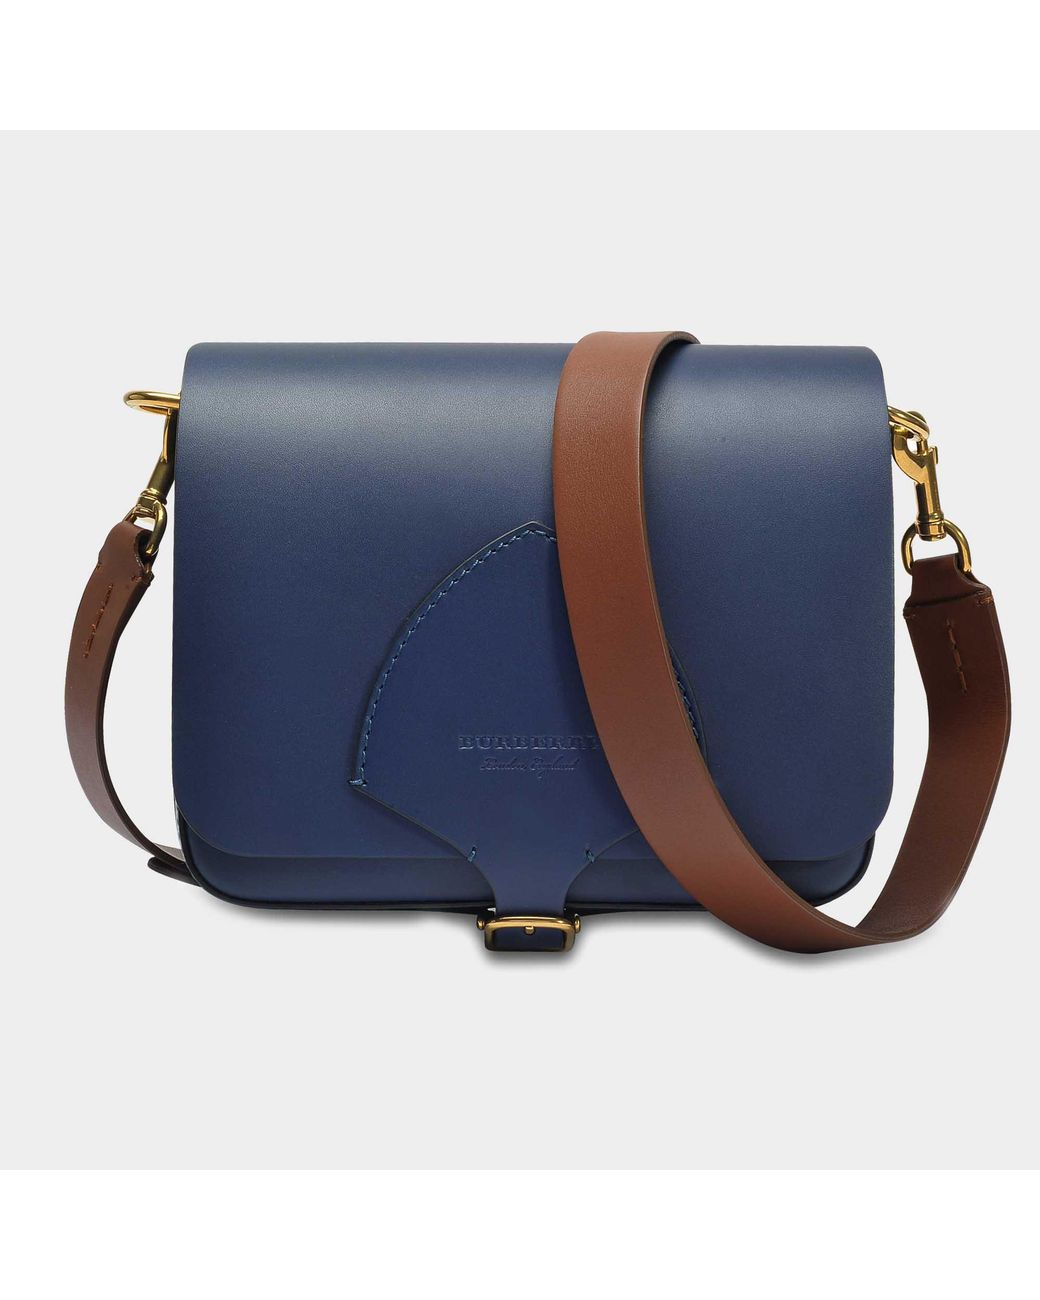 Burberry The Square Satchel Bag In Mid Indigo Soft Leather in Blue | Lyst